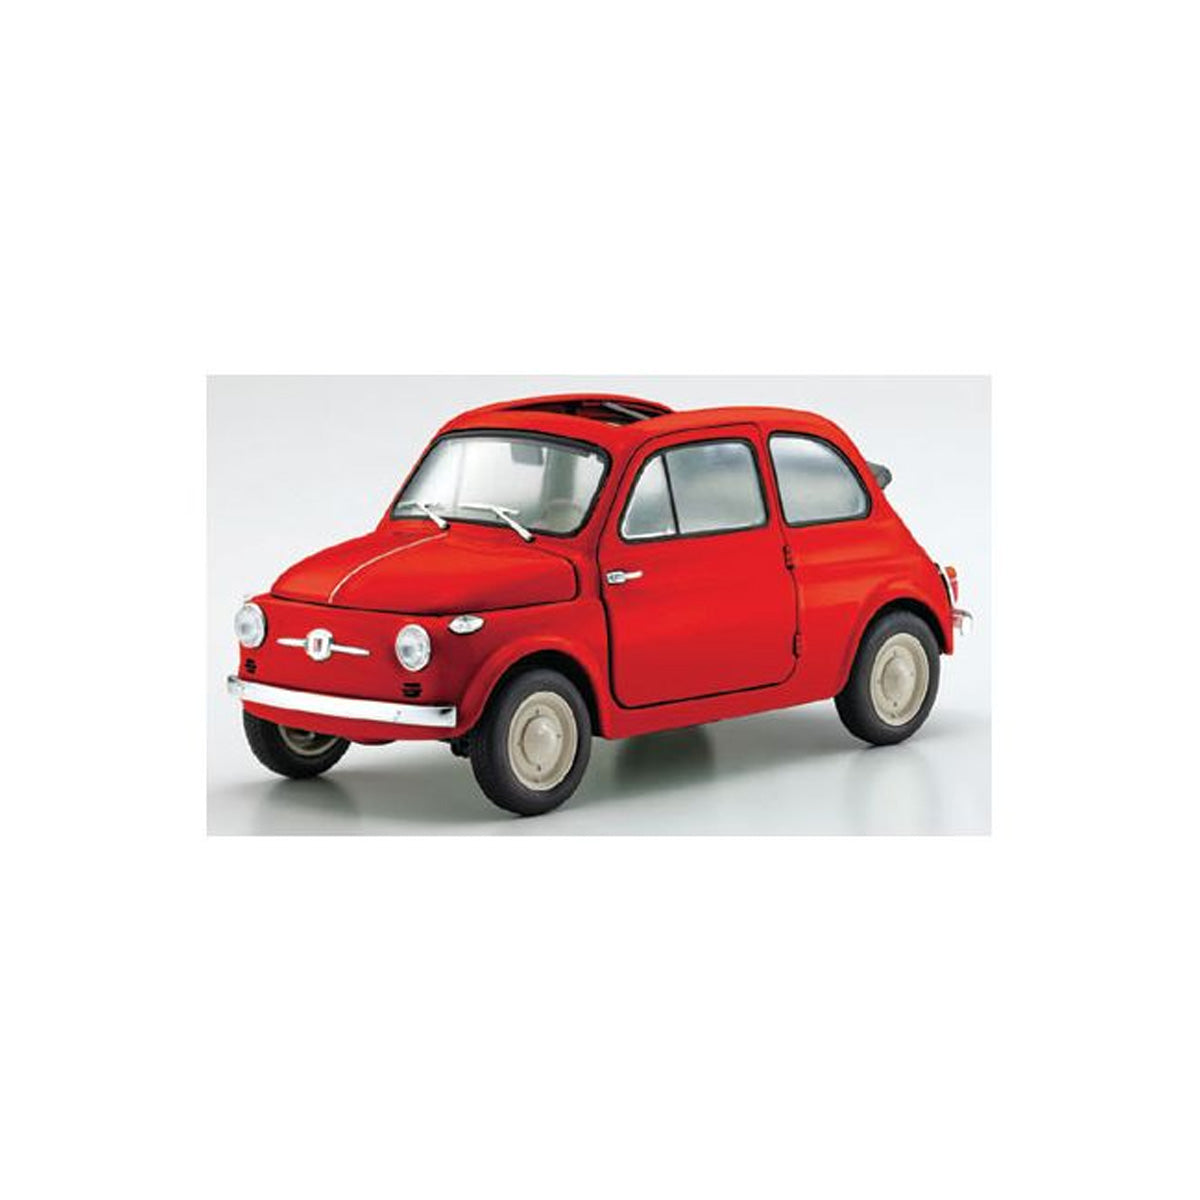 Fiat NUOVA 500 Coral Red - 1:18 Scale Diecast Model Car